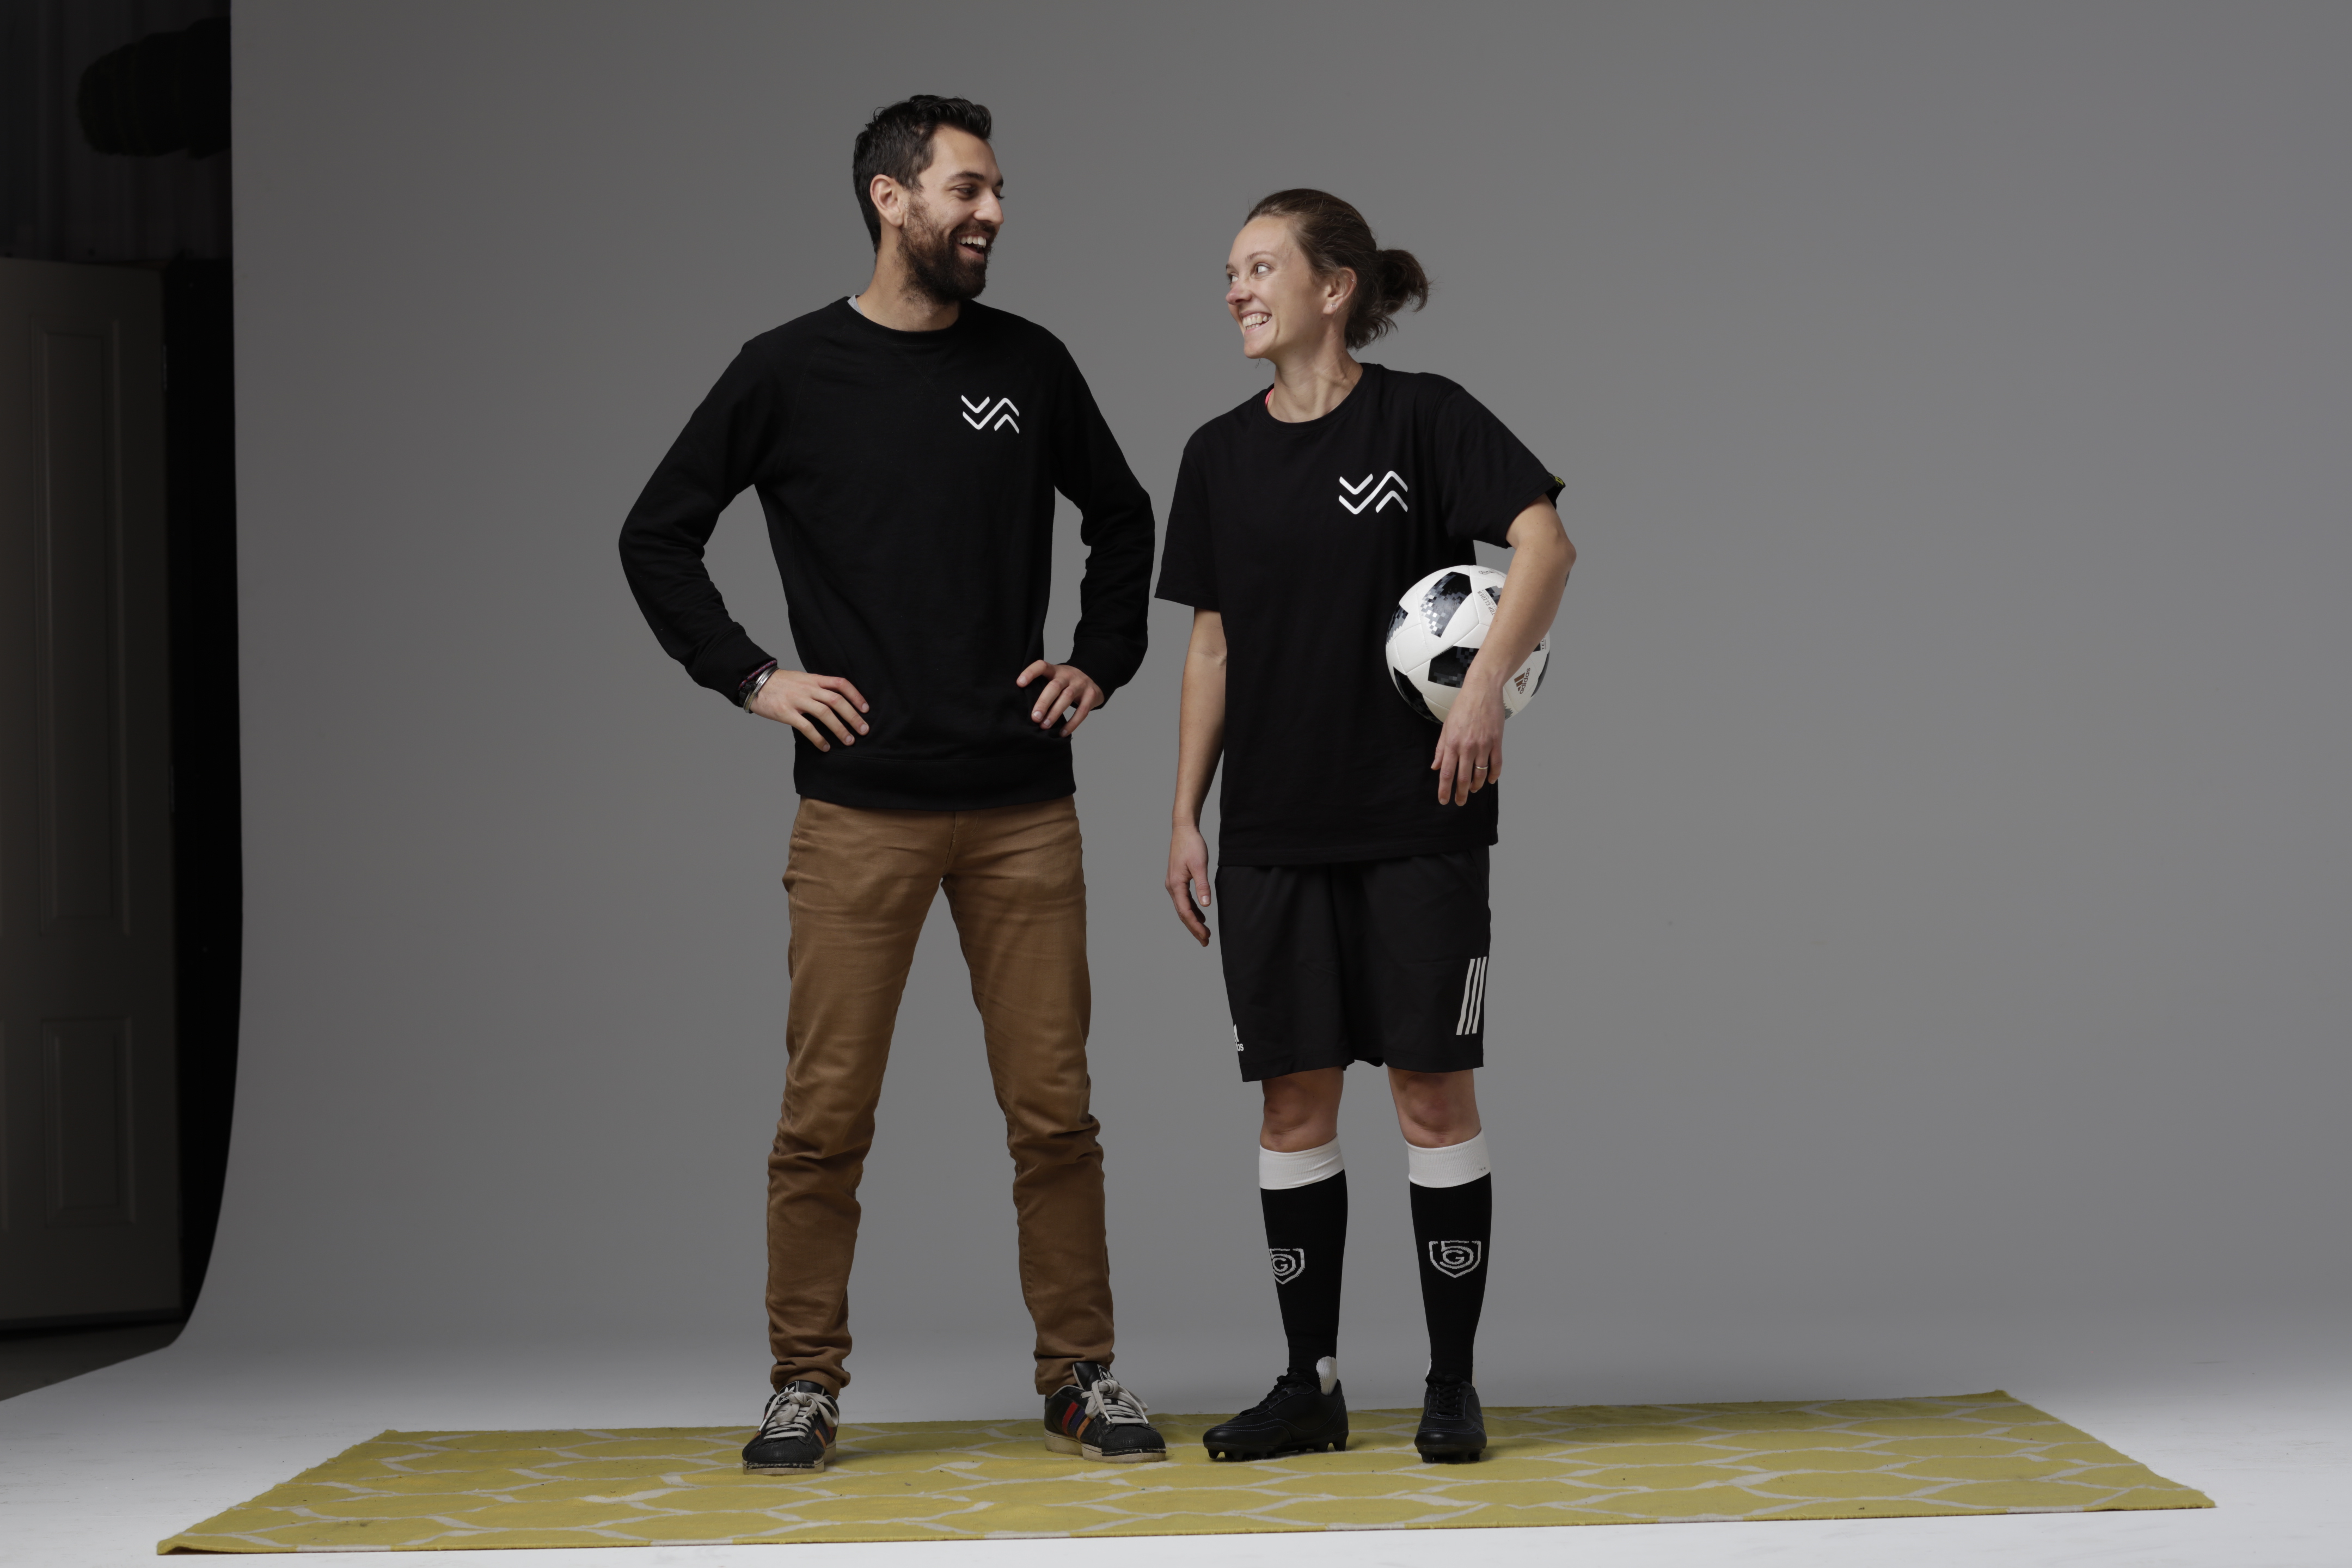 IDA Sports founders Ben Sandhu and Laura Youngson